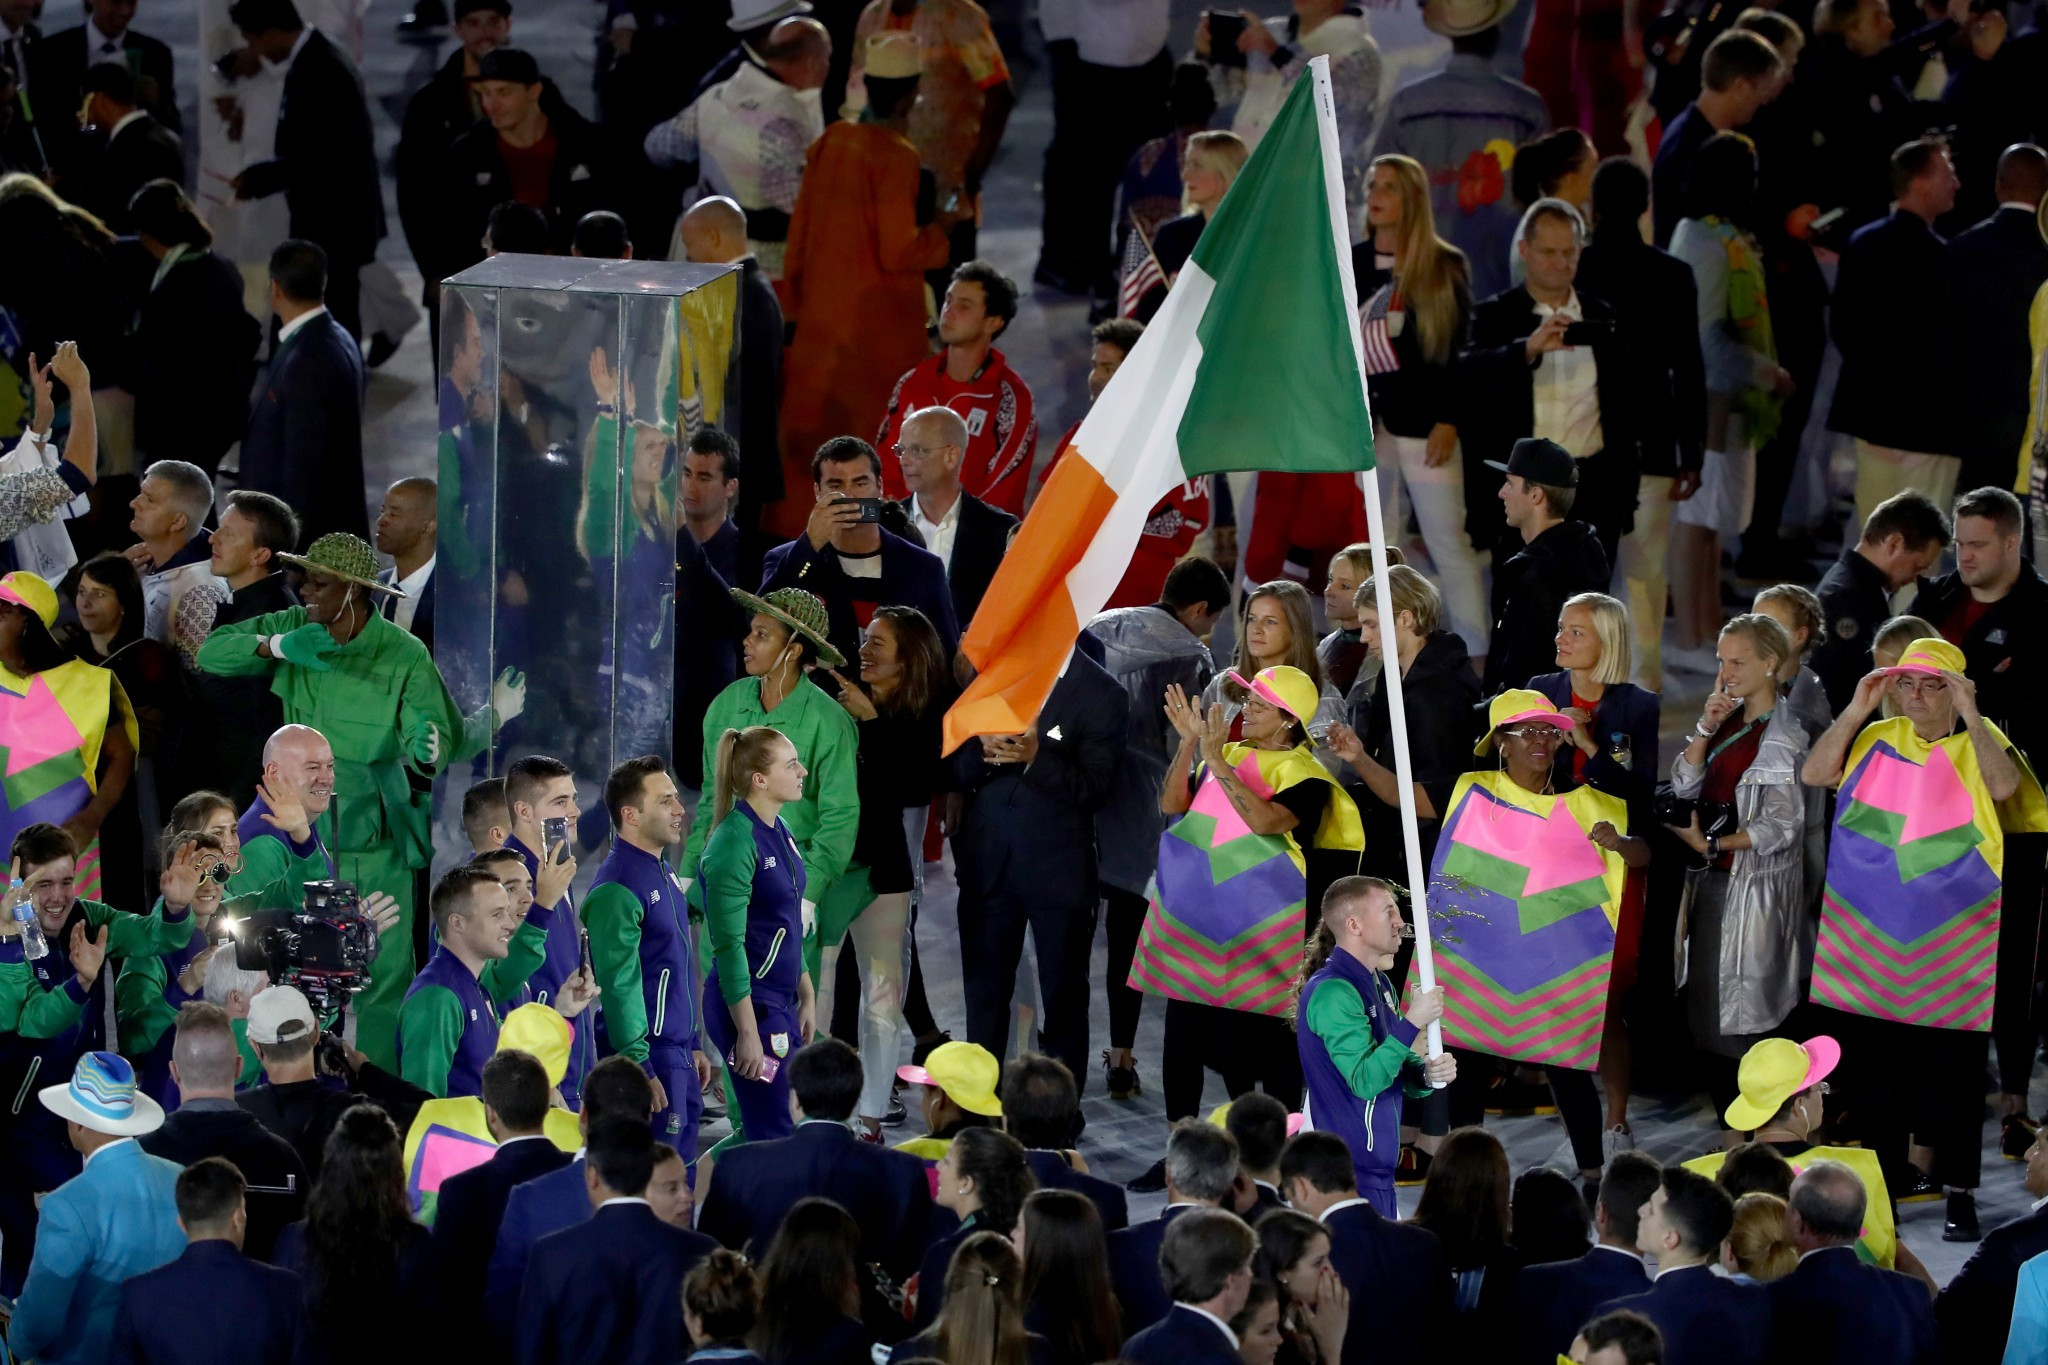 Irish Ministers criticise IOC and Rio 2016 for not cooperating with Moran Report